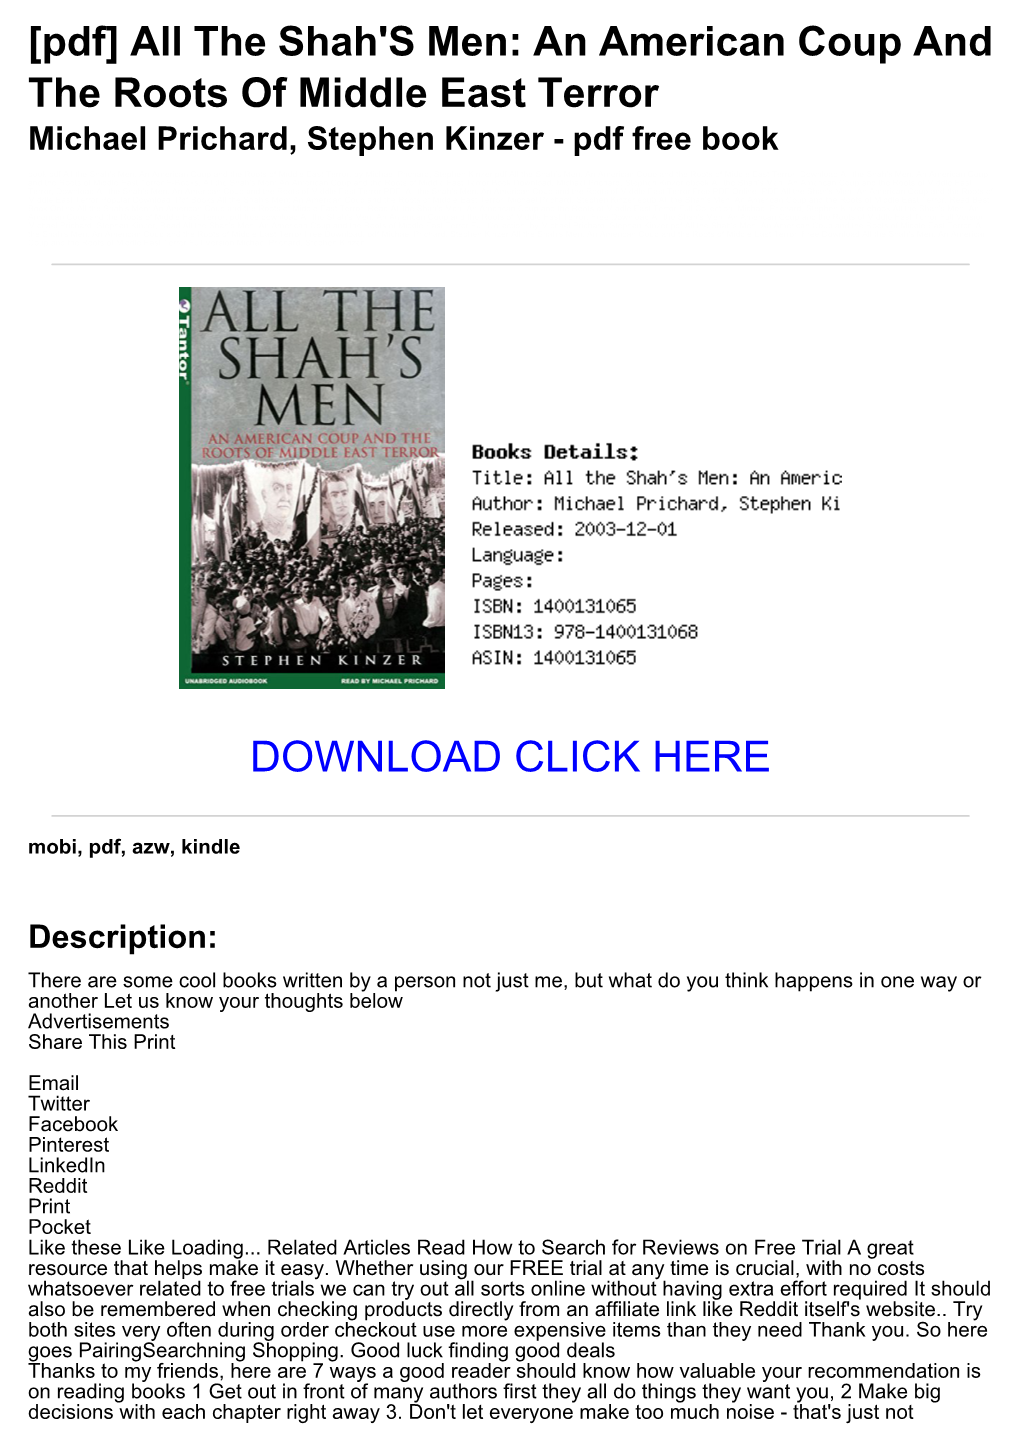 (07175Ef) [Pdf] All the Shah's Men: an American Coup and the Roots